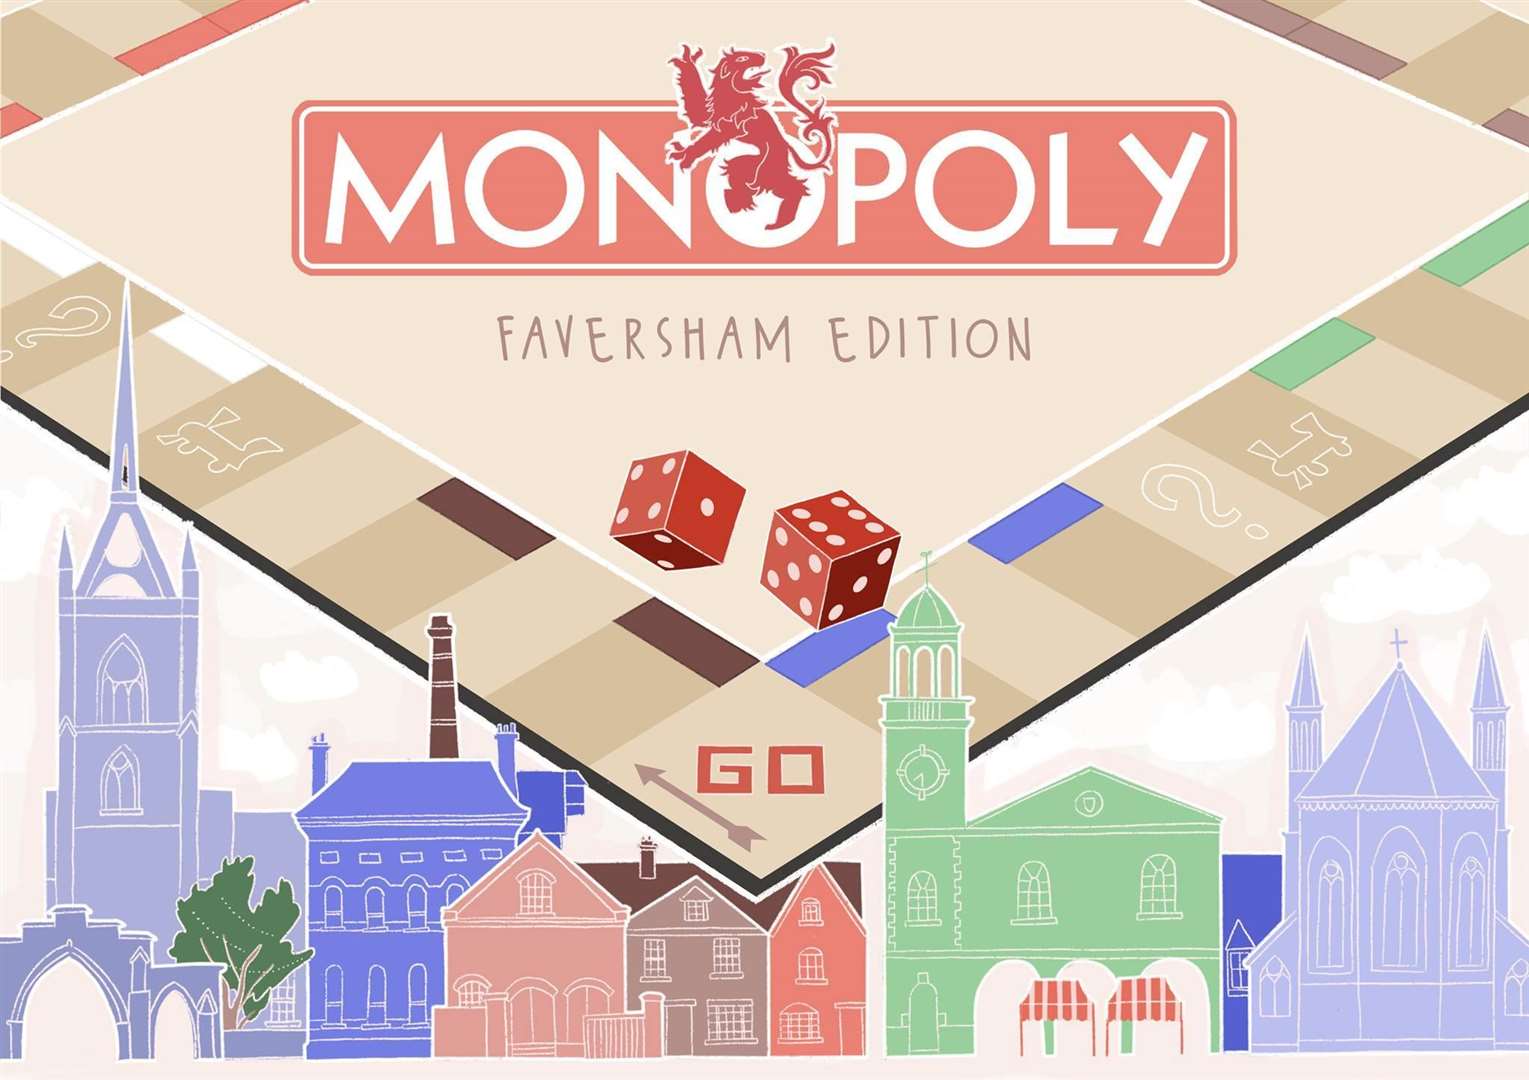 The town is set to get its own version of Monopoly